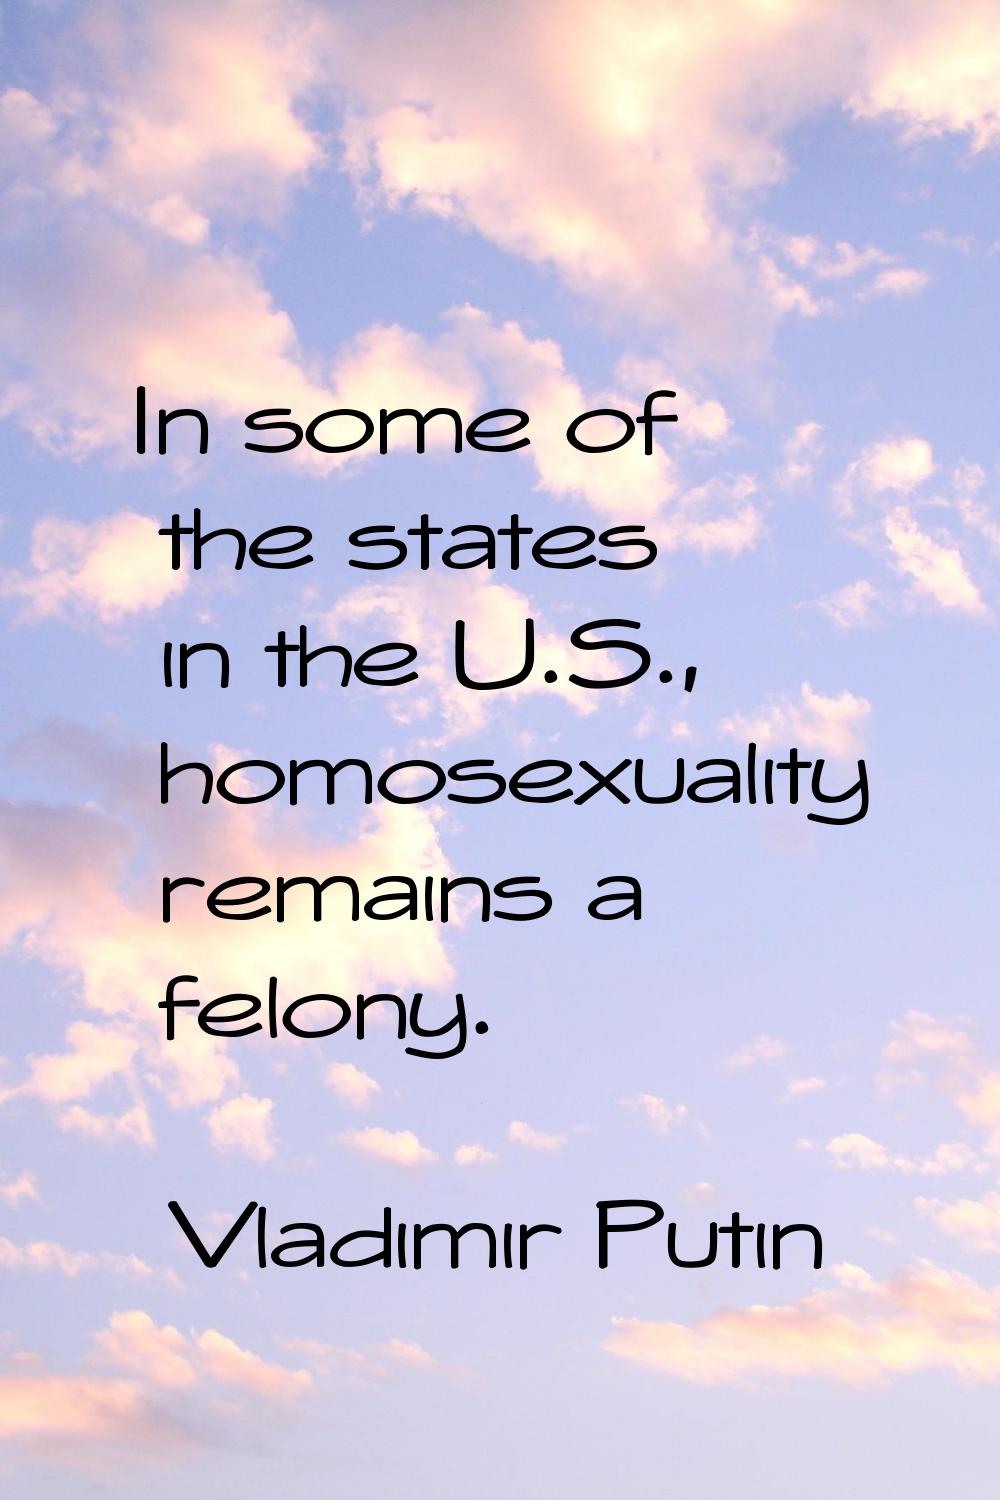 In some of the states in the U.S., homosexuality remains a felony.